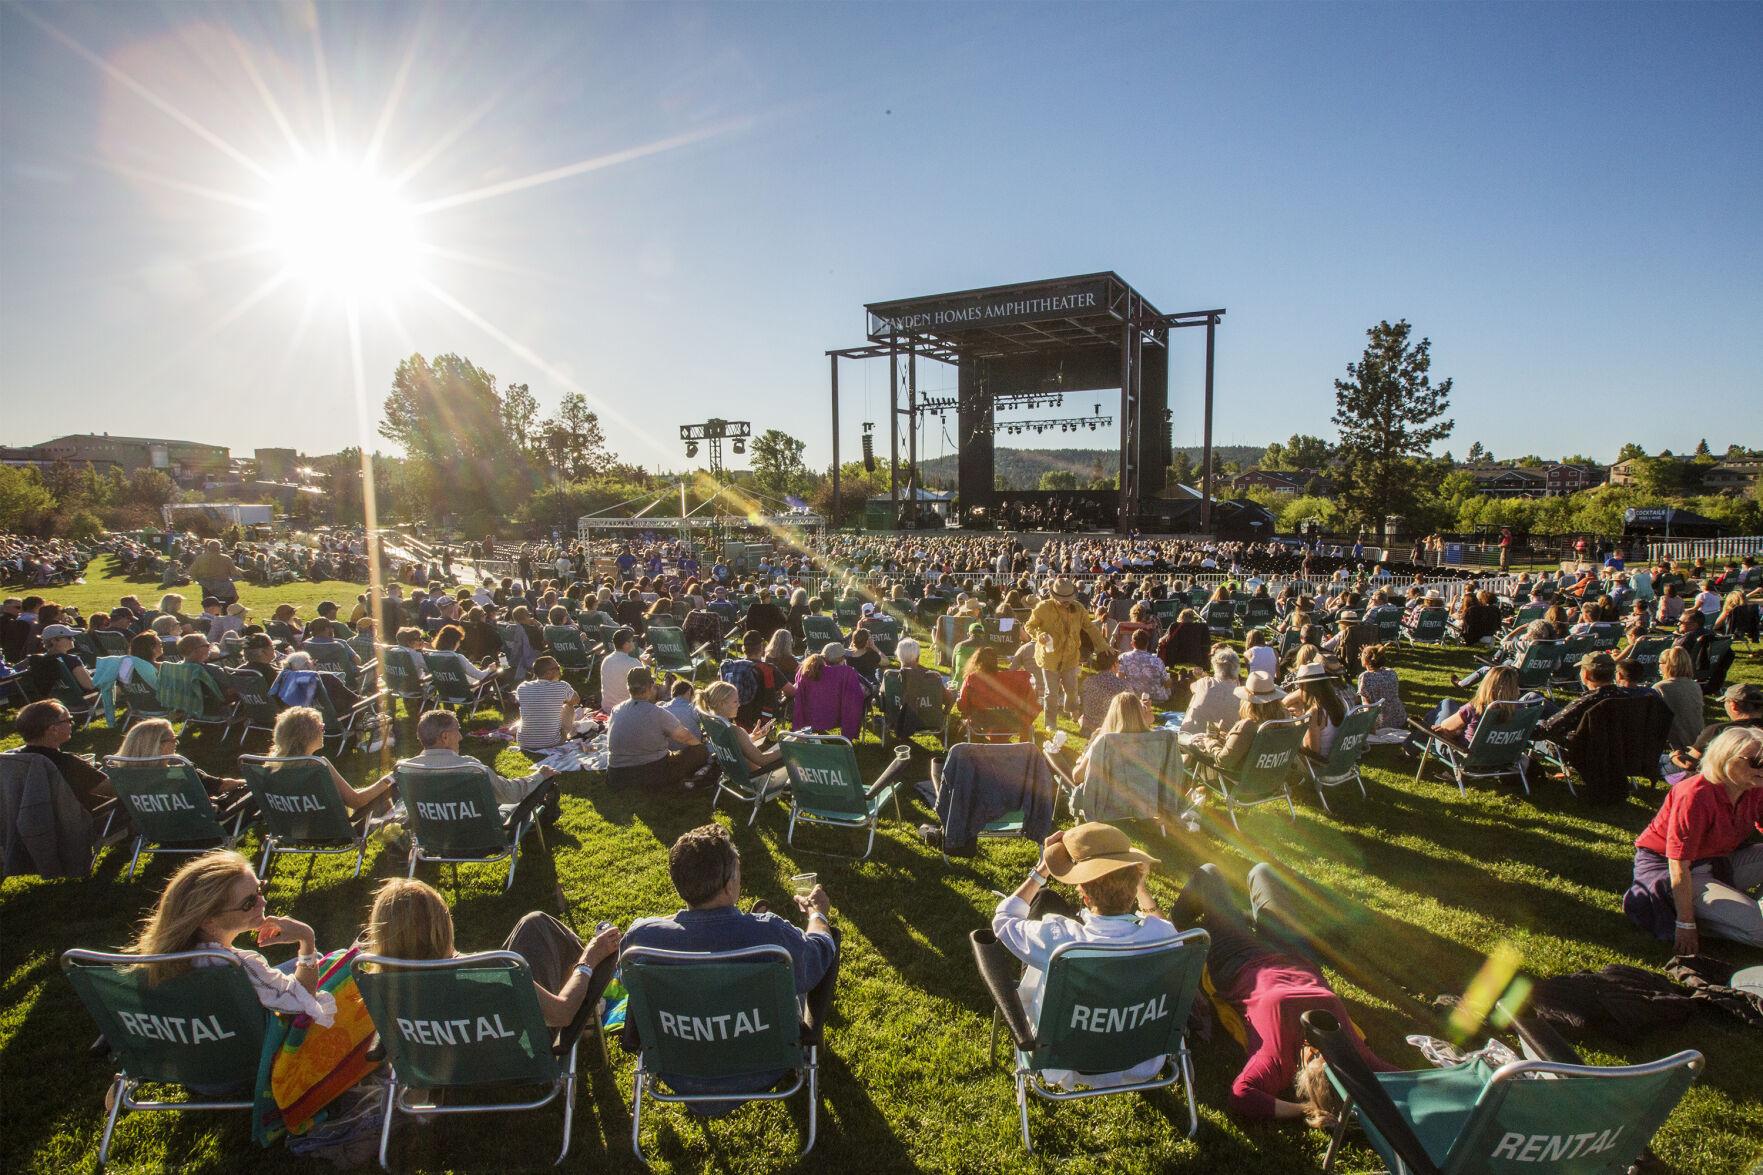 A concertgoer's guide for Hayden Homes Amphitheater in Bend